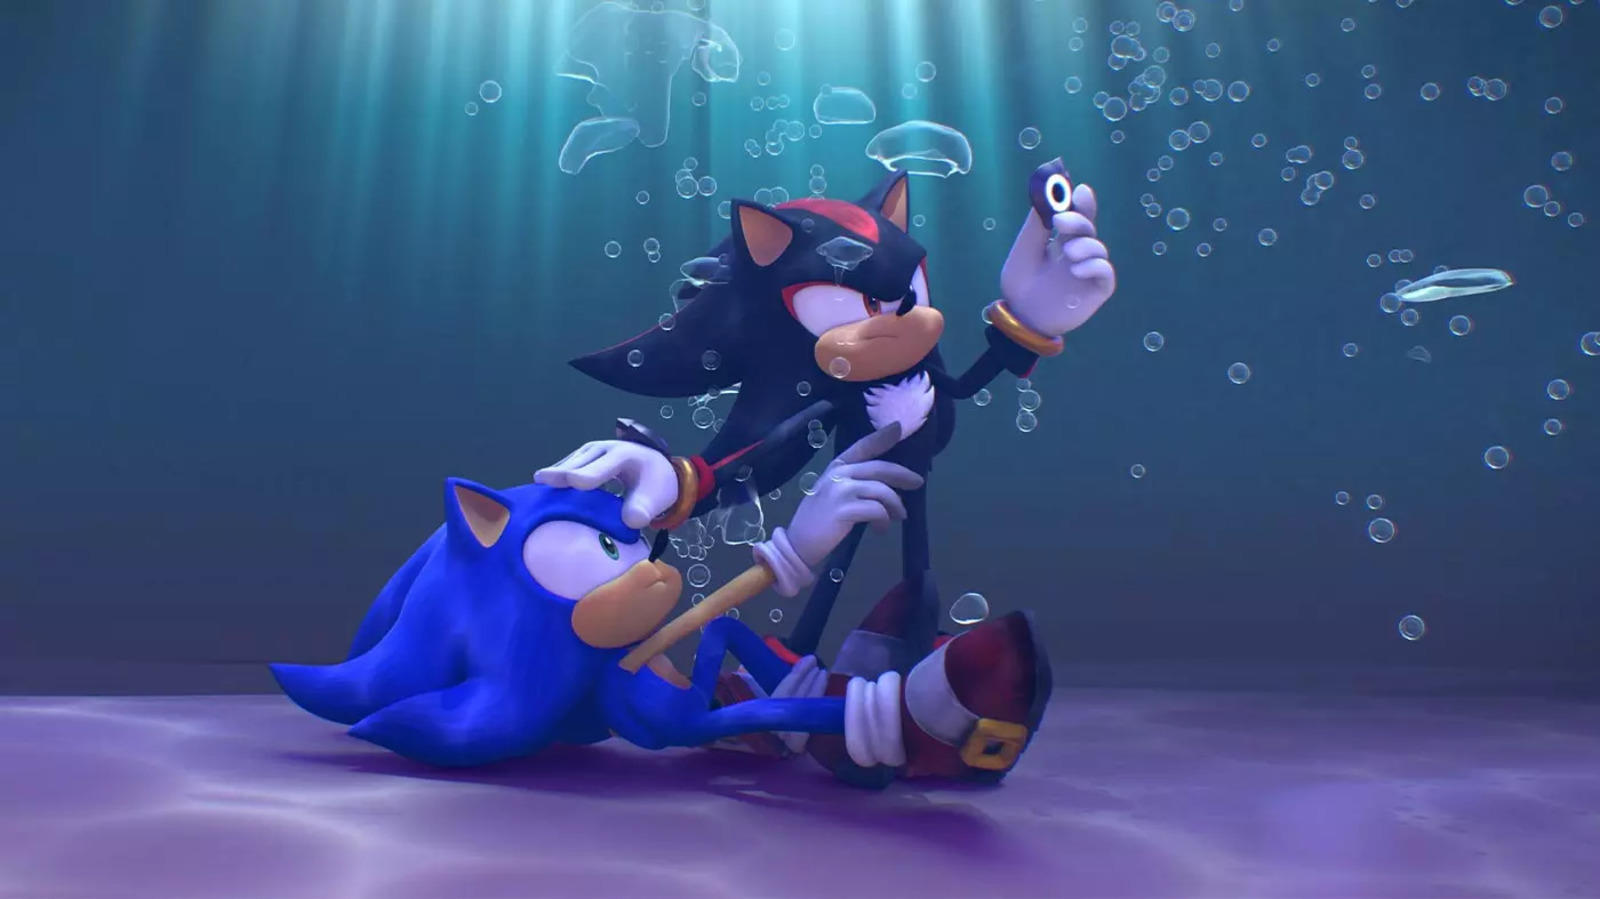 Sonic, Shadow, and Silver Photo: So, what's next?